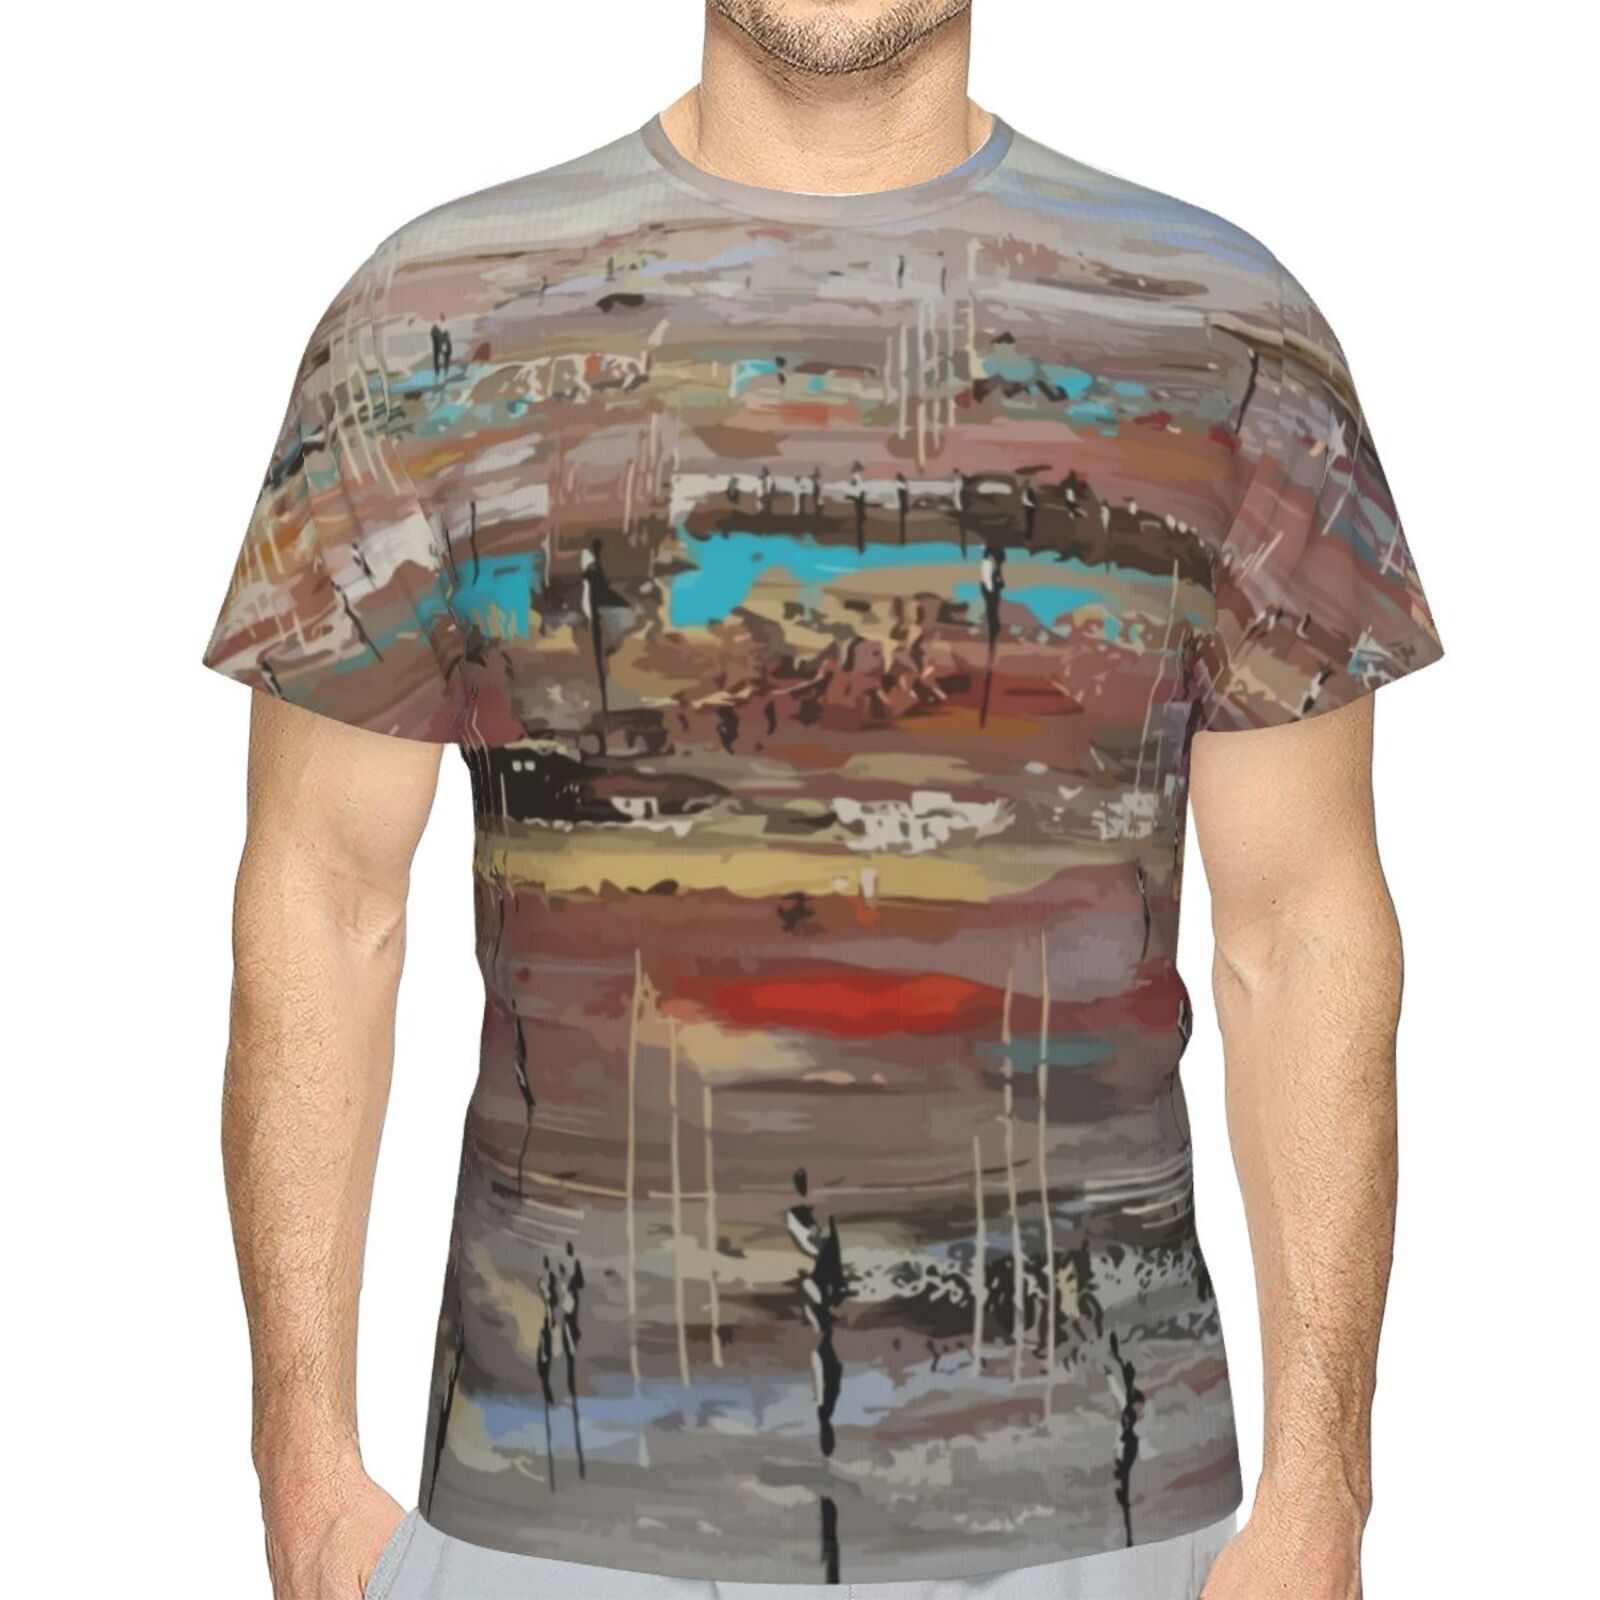 WAKE UP! Painting Elements Classic T-shirt